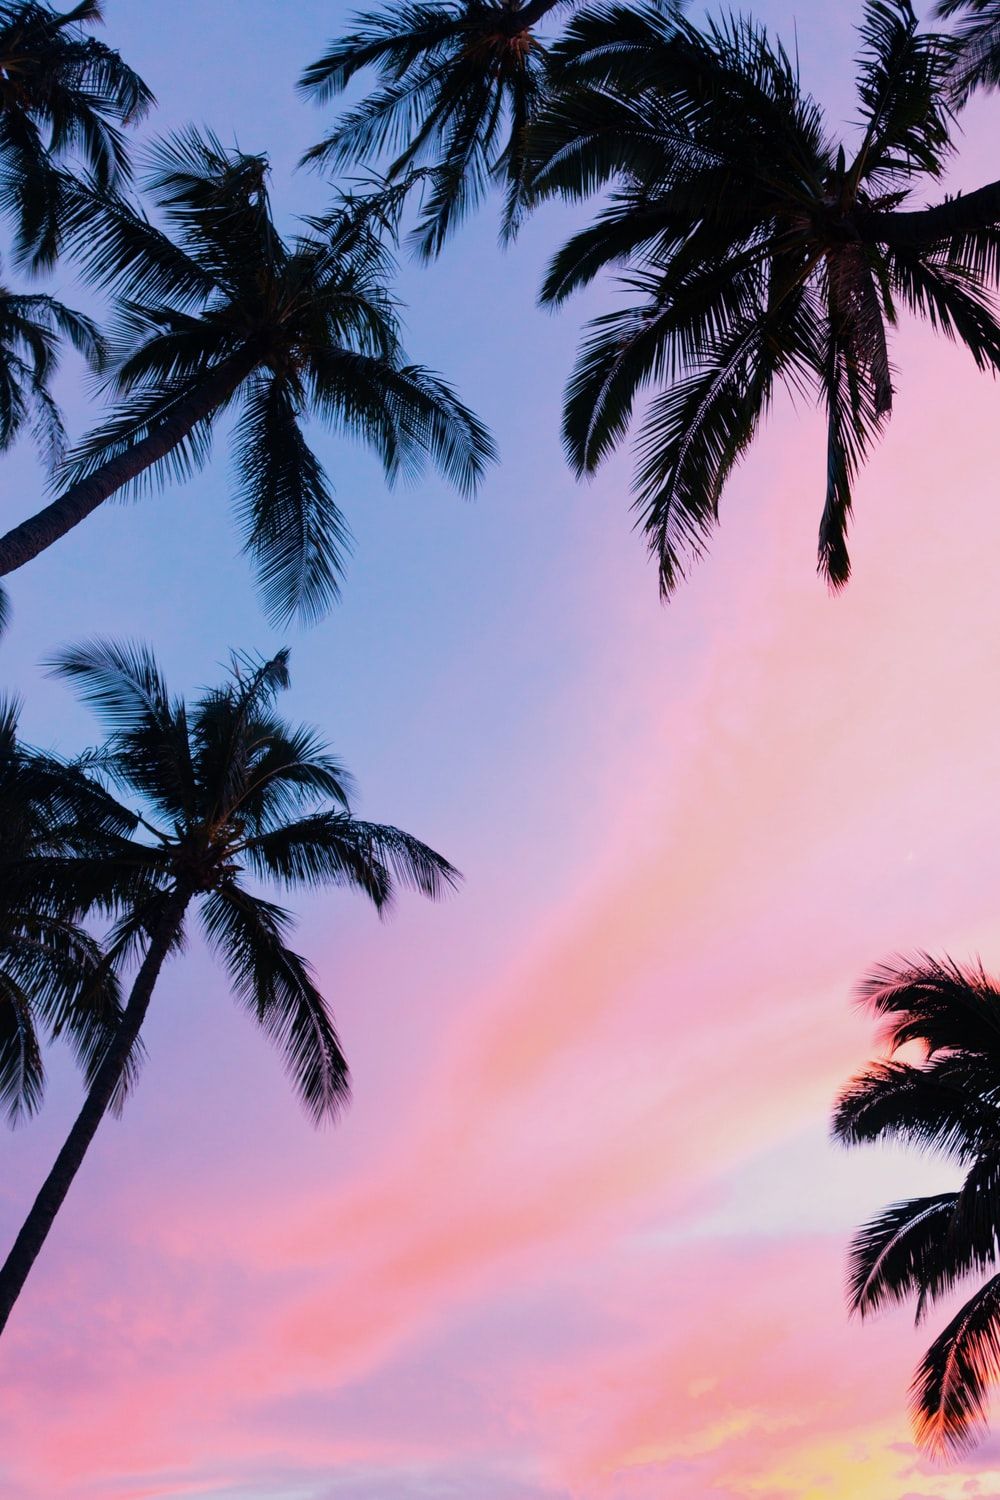 Palm Trees And Moon Amoled IPhone Wallpaper HD IPhone Wallpapers Wallpaper  Download  MOONAZ